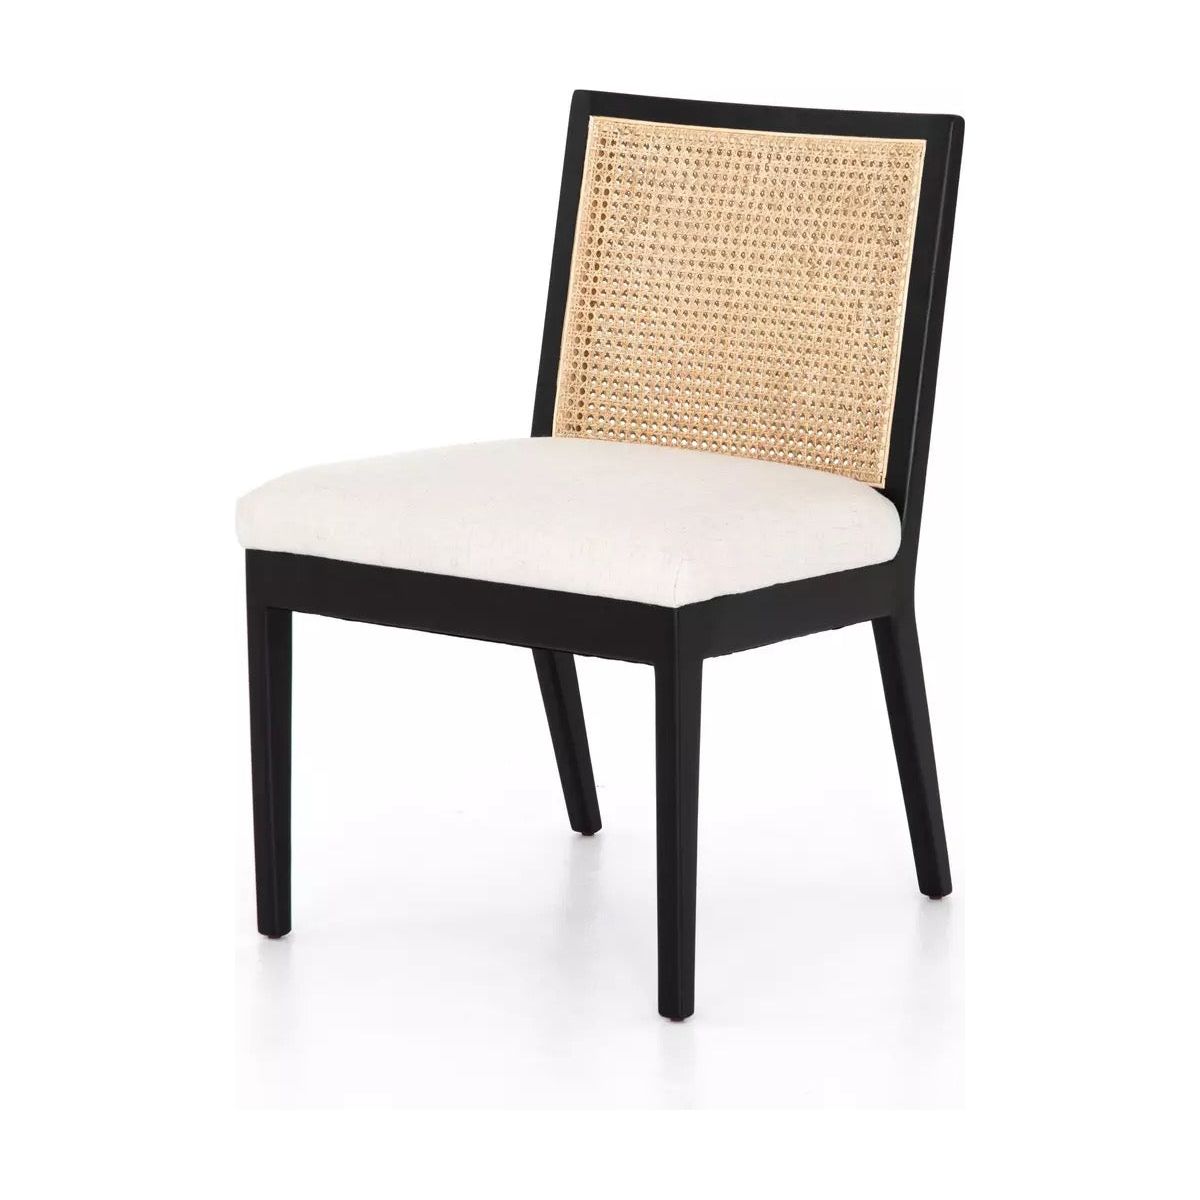 A contemporary Antonia Cane Armless Dining Chair with a black wooden frame and four legs. It features a beige upholstered seat cushion made of high-performance fabric and a backrest crafted from woven rattan, providing a stylish contrast. The durable design exudes modern elegance with a touch of natural texture against a white background.